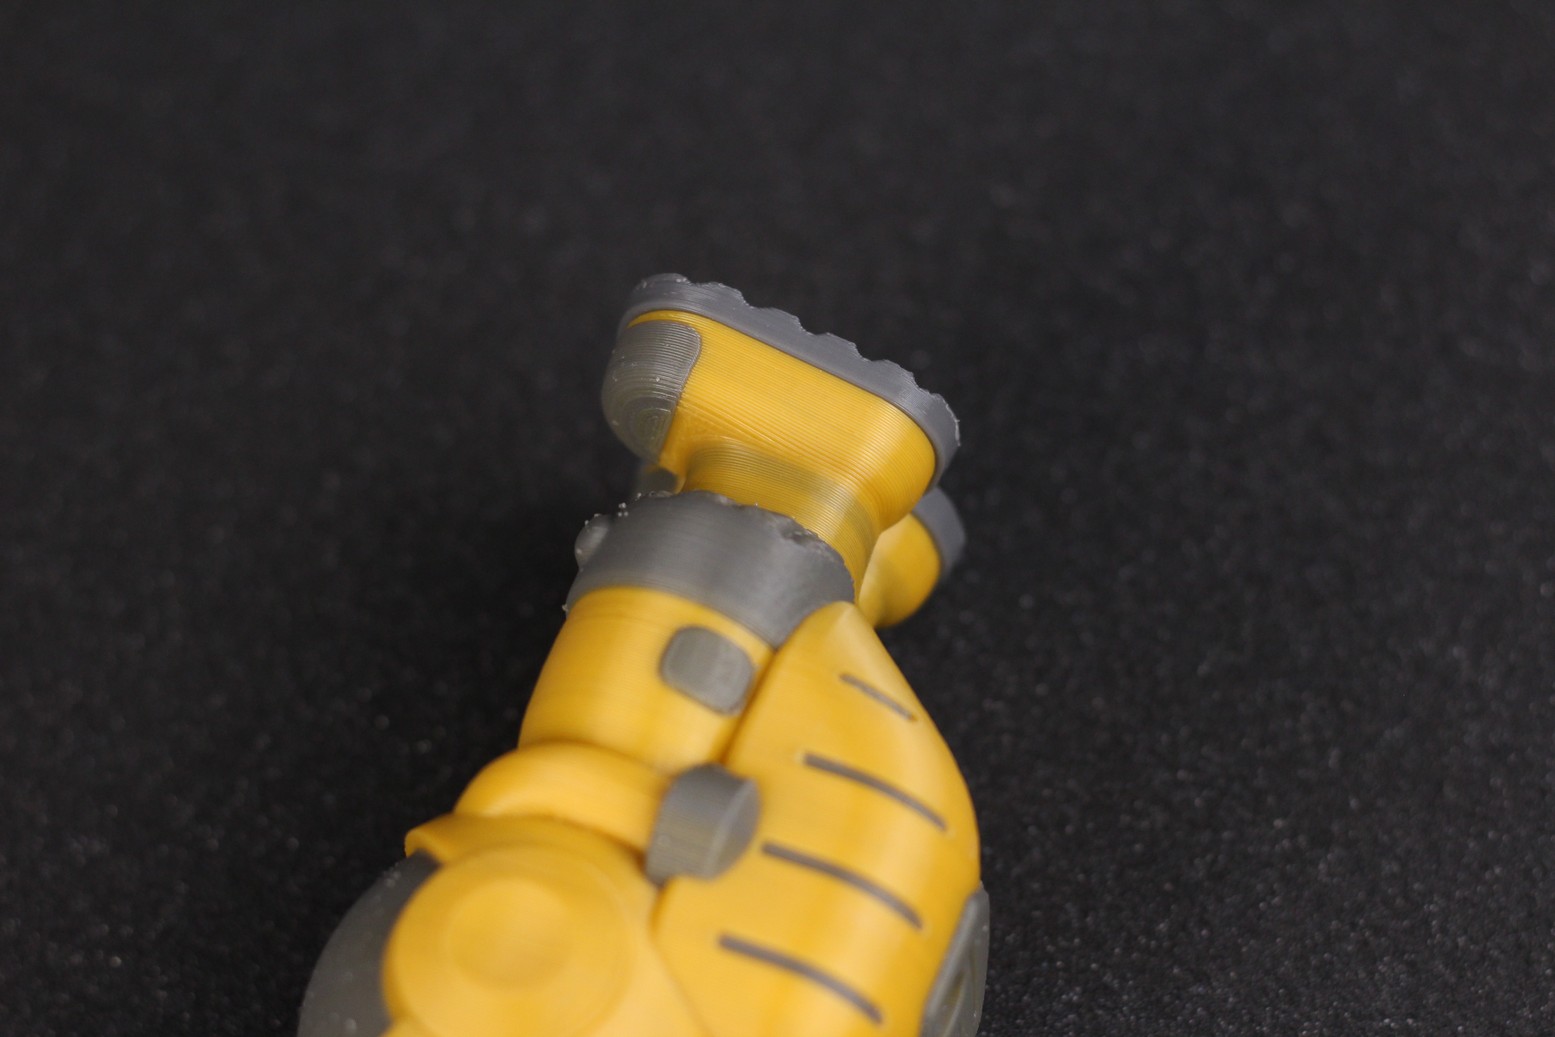 Phil A Ment printed on SC 10 Shark V2 1 | LOTMAXX SC-10 Shark V2 Review: Dual Color Printing and Laser Engraving